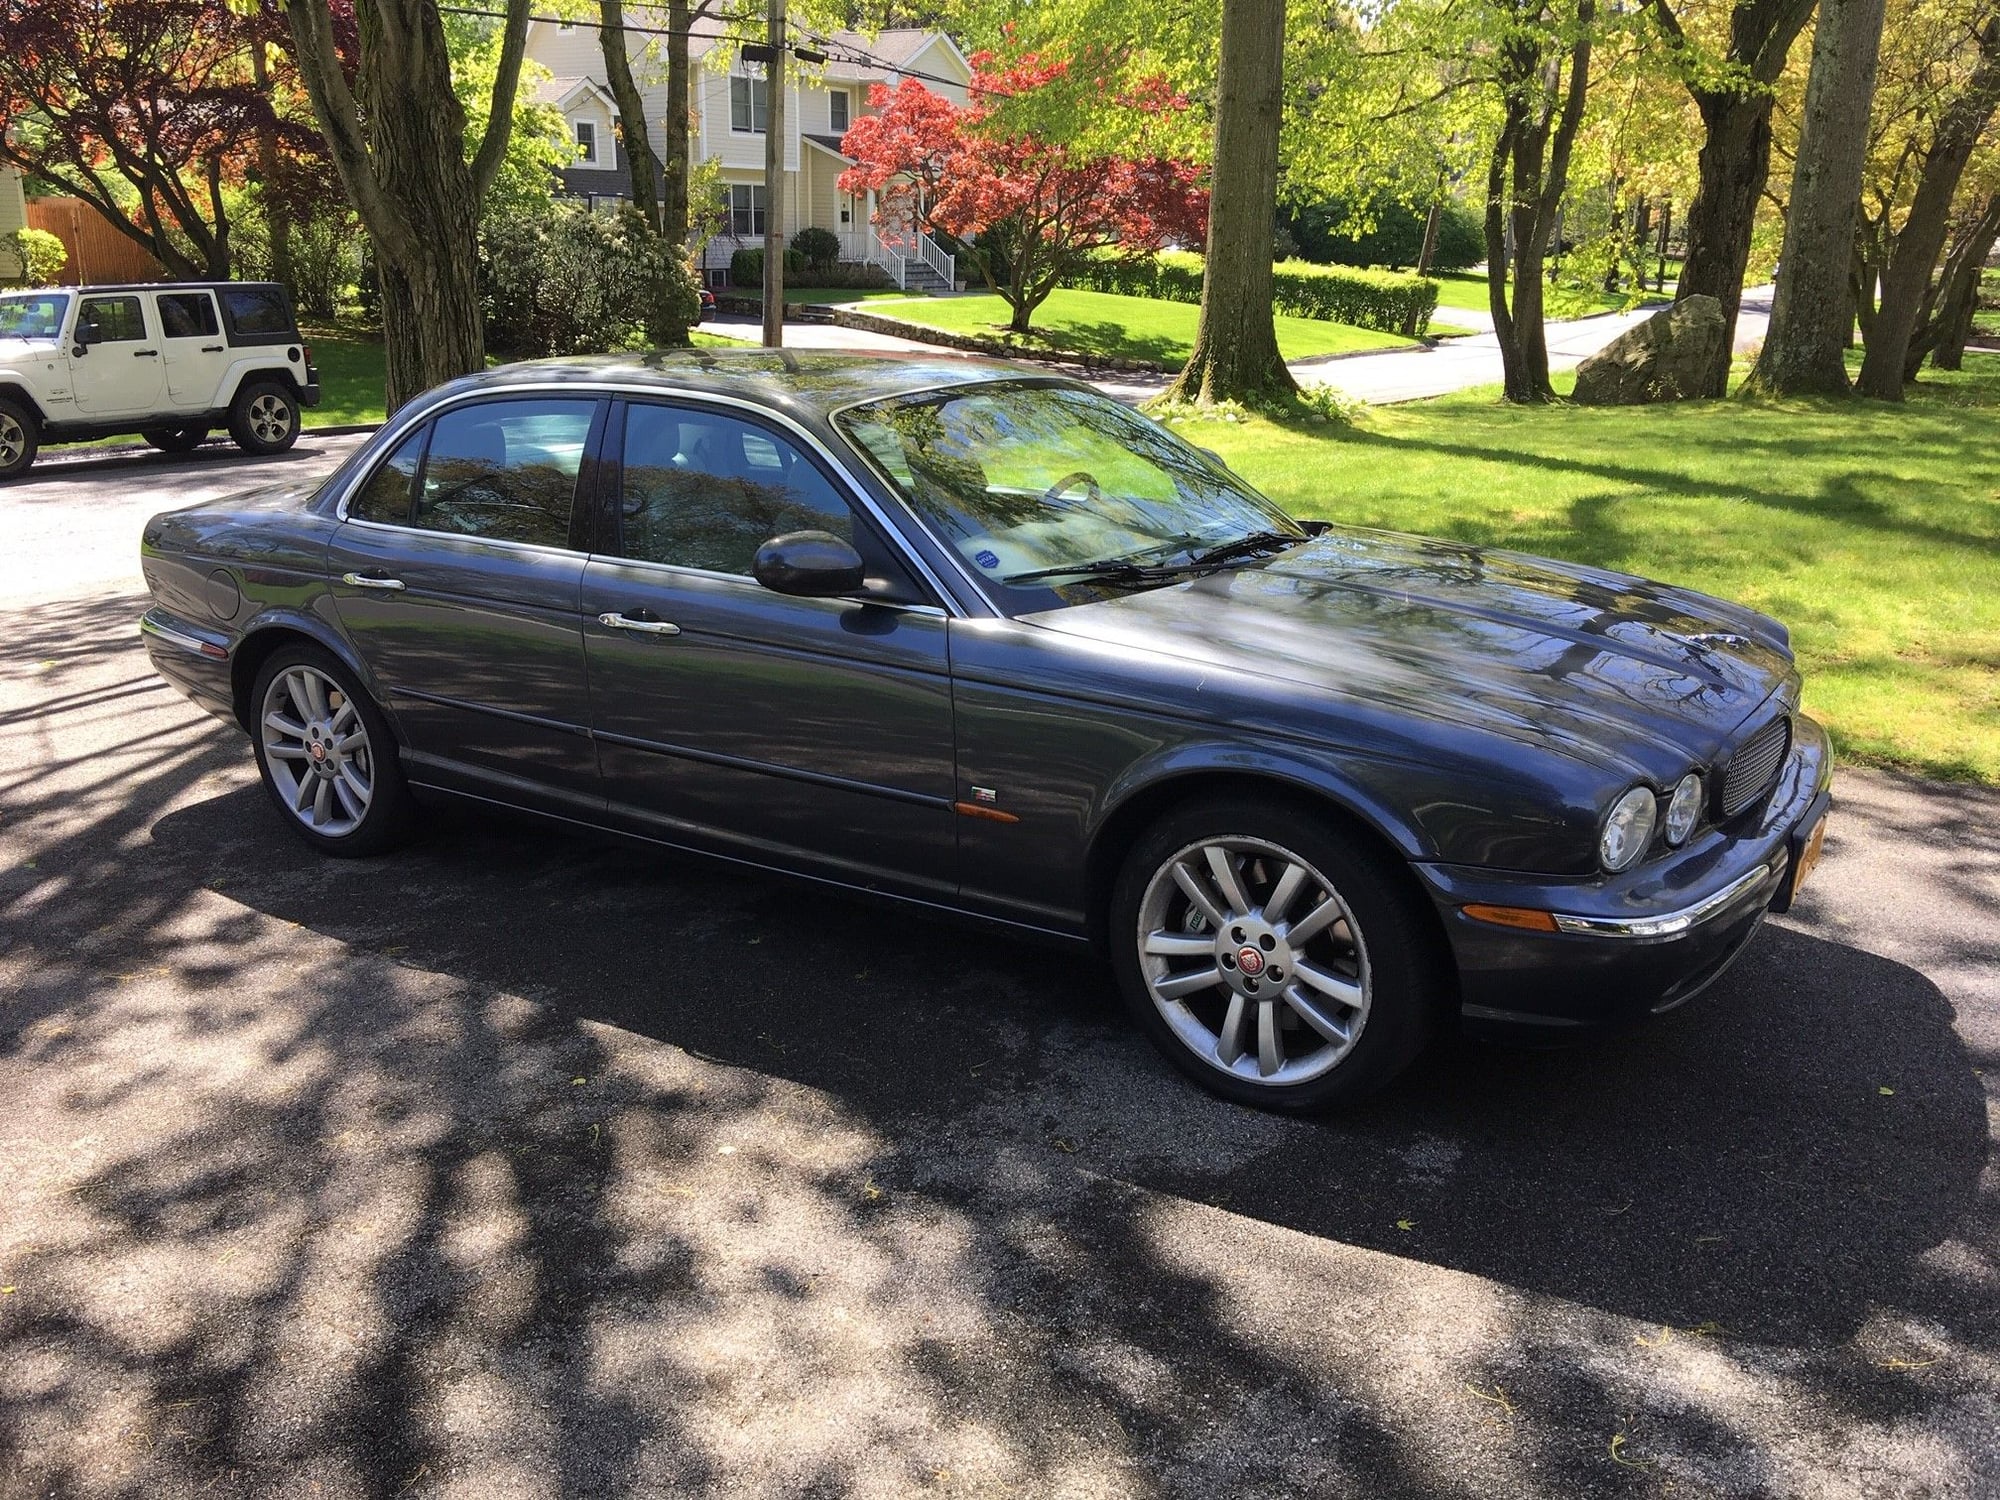 2004 Jaguar XJR - 2004 XJR for sale or trade - Used - VIN SAJEA73B34TG11481 - 124,000 Miles - 8 cyl - 2WD - Automatic - Sedan - Gray - Rye Brook, NY 10573, United States